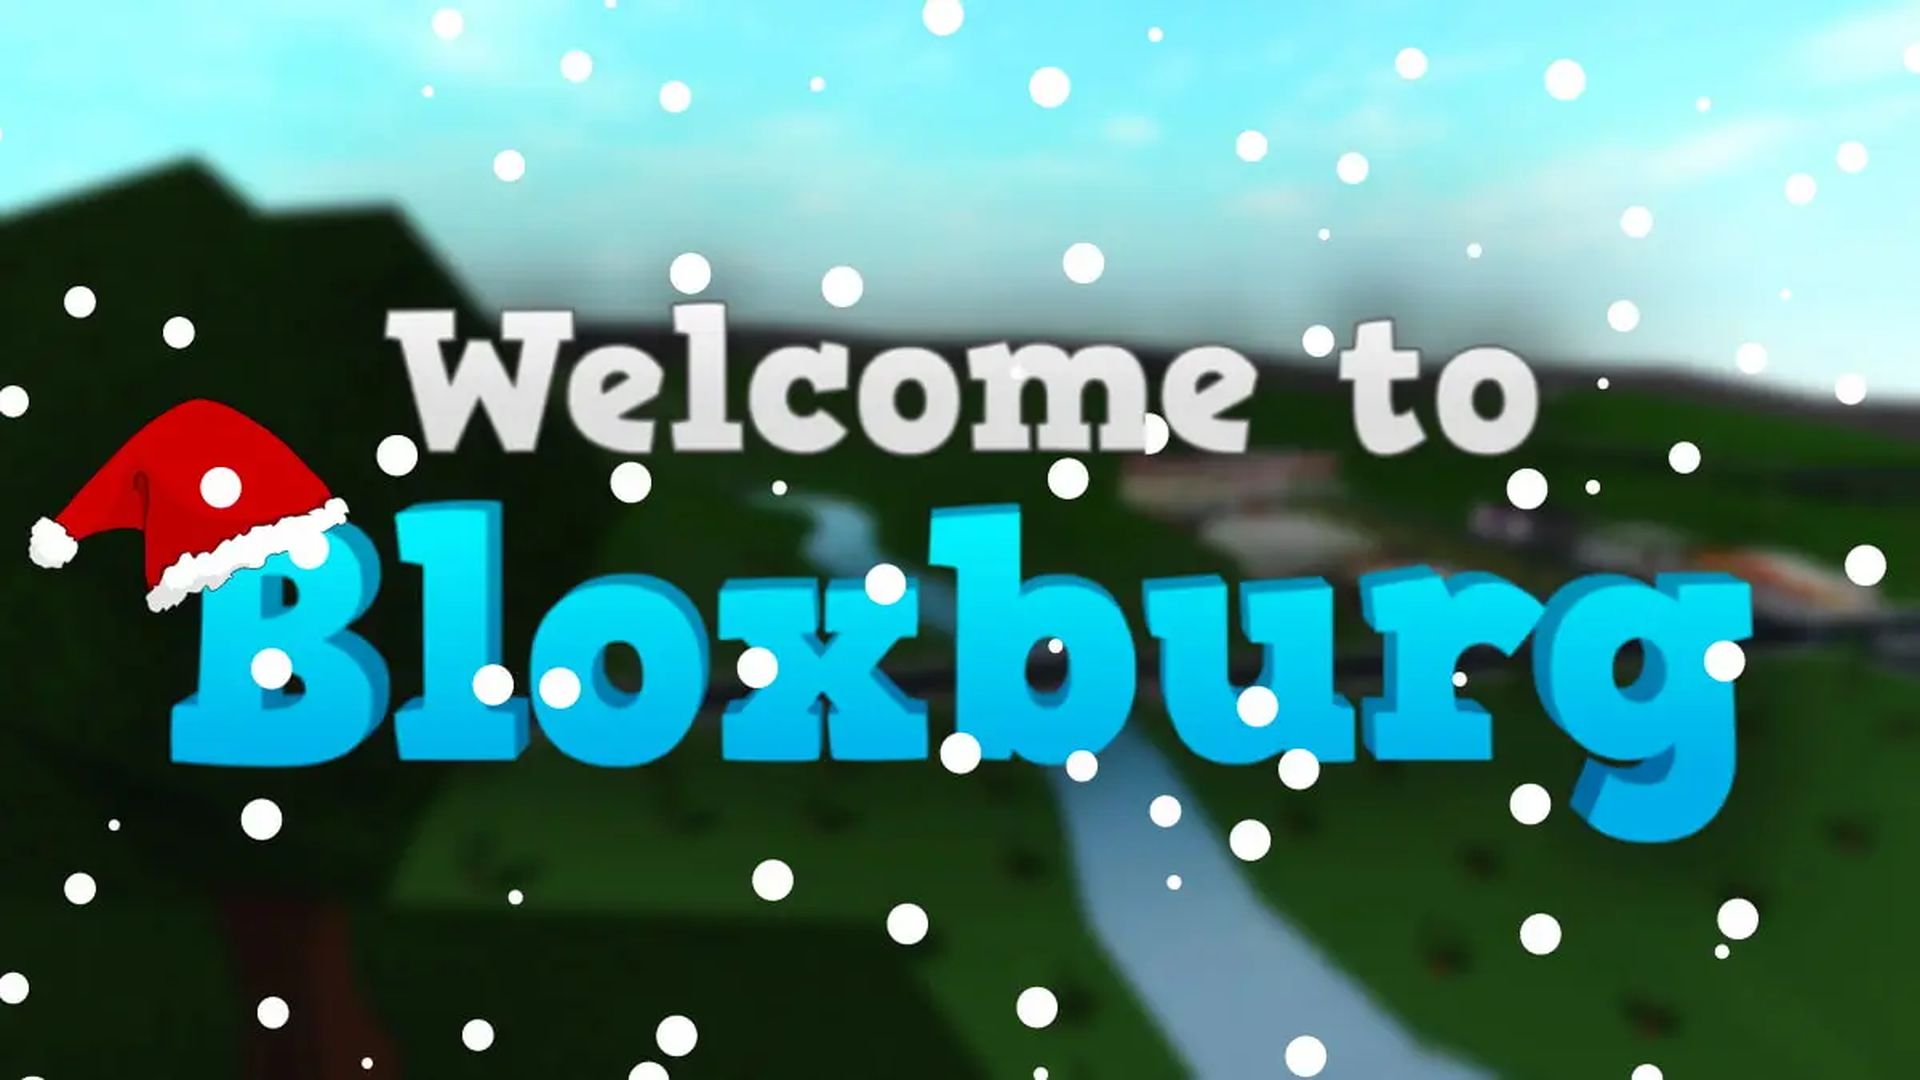 How to get Christmas decorations in Bloxburg?